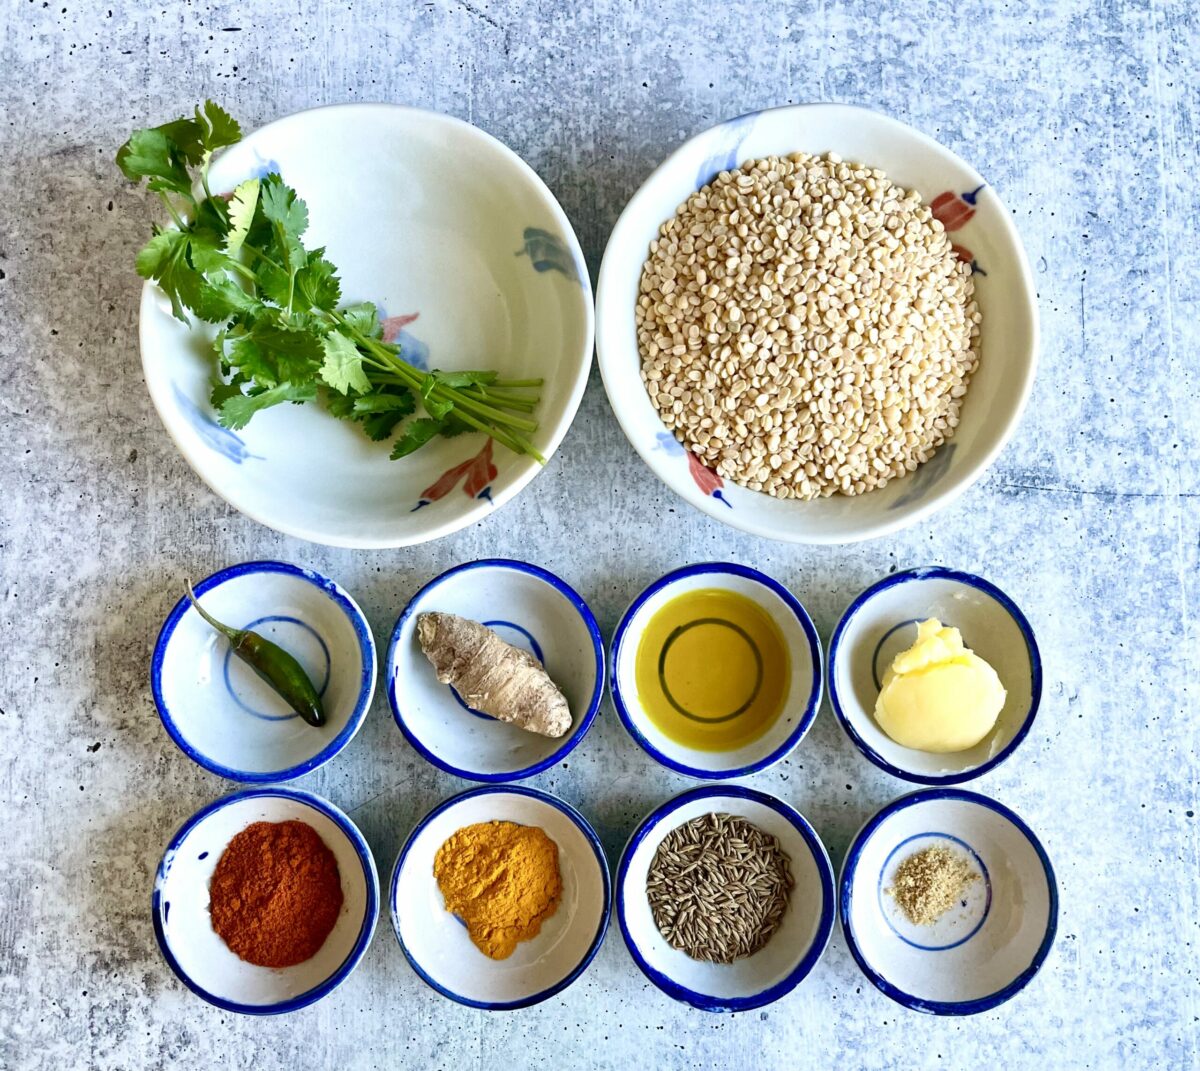 Ingredients for Bengali Moong Dal Recipe: fresh cilantro, split moong dal, whole green chili, ginger, mustard oil, ghee, chili powder, turmeric powder, cumin seeds, hing. All in small preparation bowls.